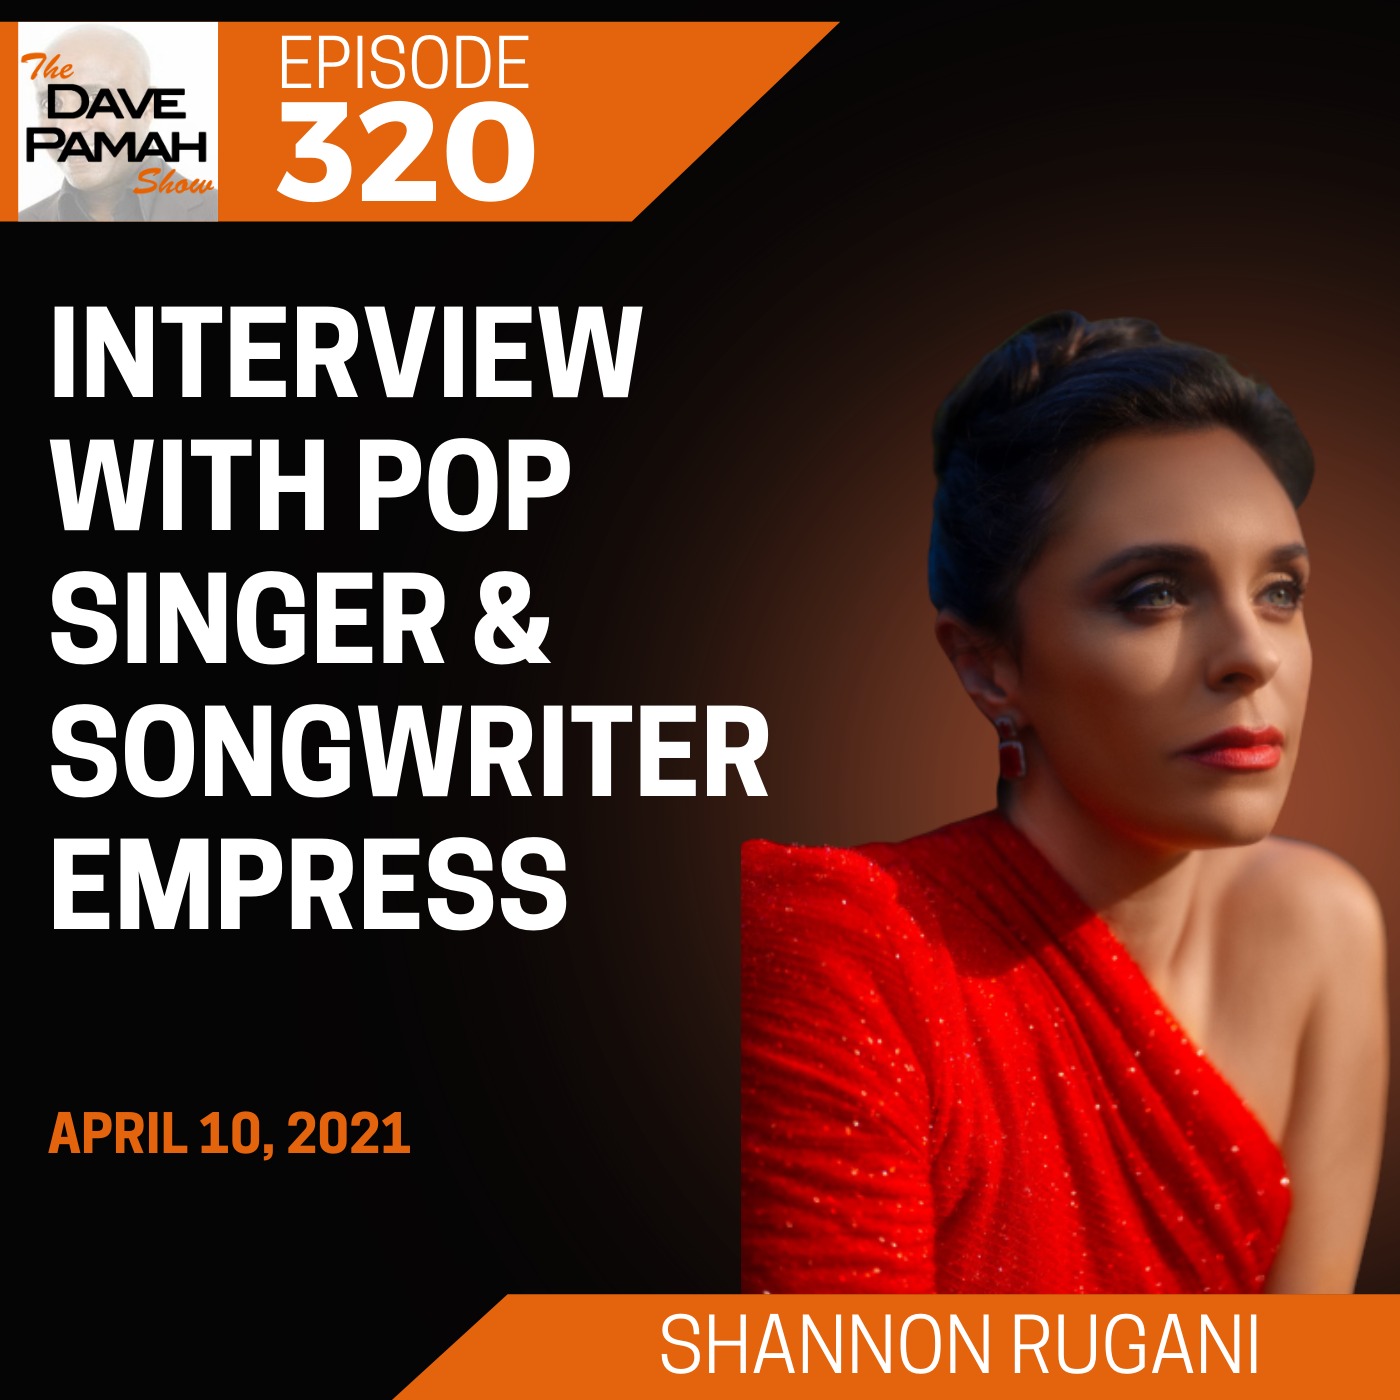 Interview with pop singer/songwriter Shannon Rugani aka EMPRESS